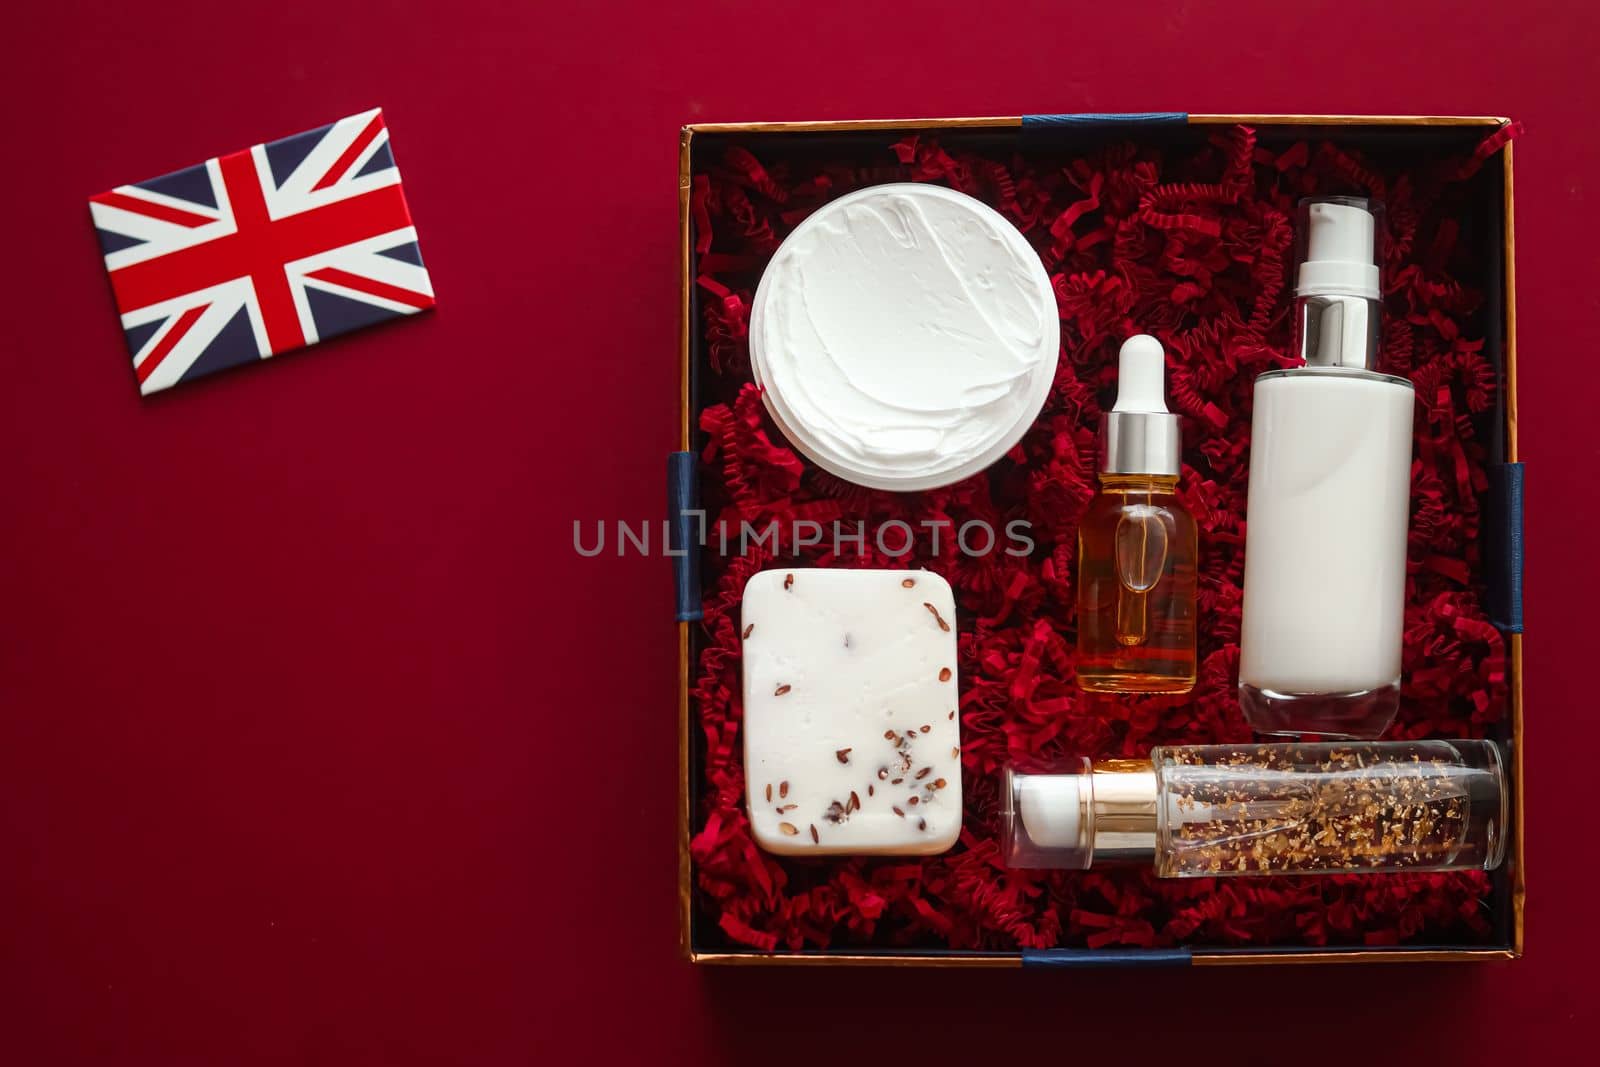 Beauty box subscription delivery in United Kingdom, luxury skincare products, spa and body care cosmetics and UK flag on red flat lay background, online shopping, flatlay view.